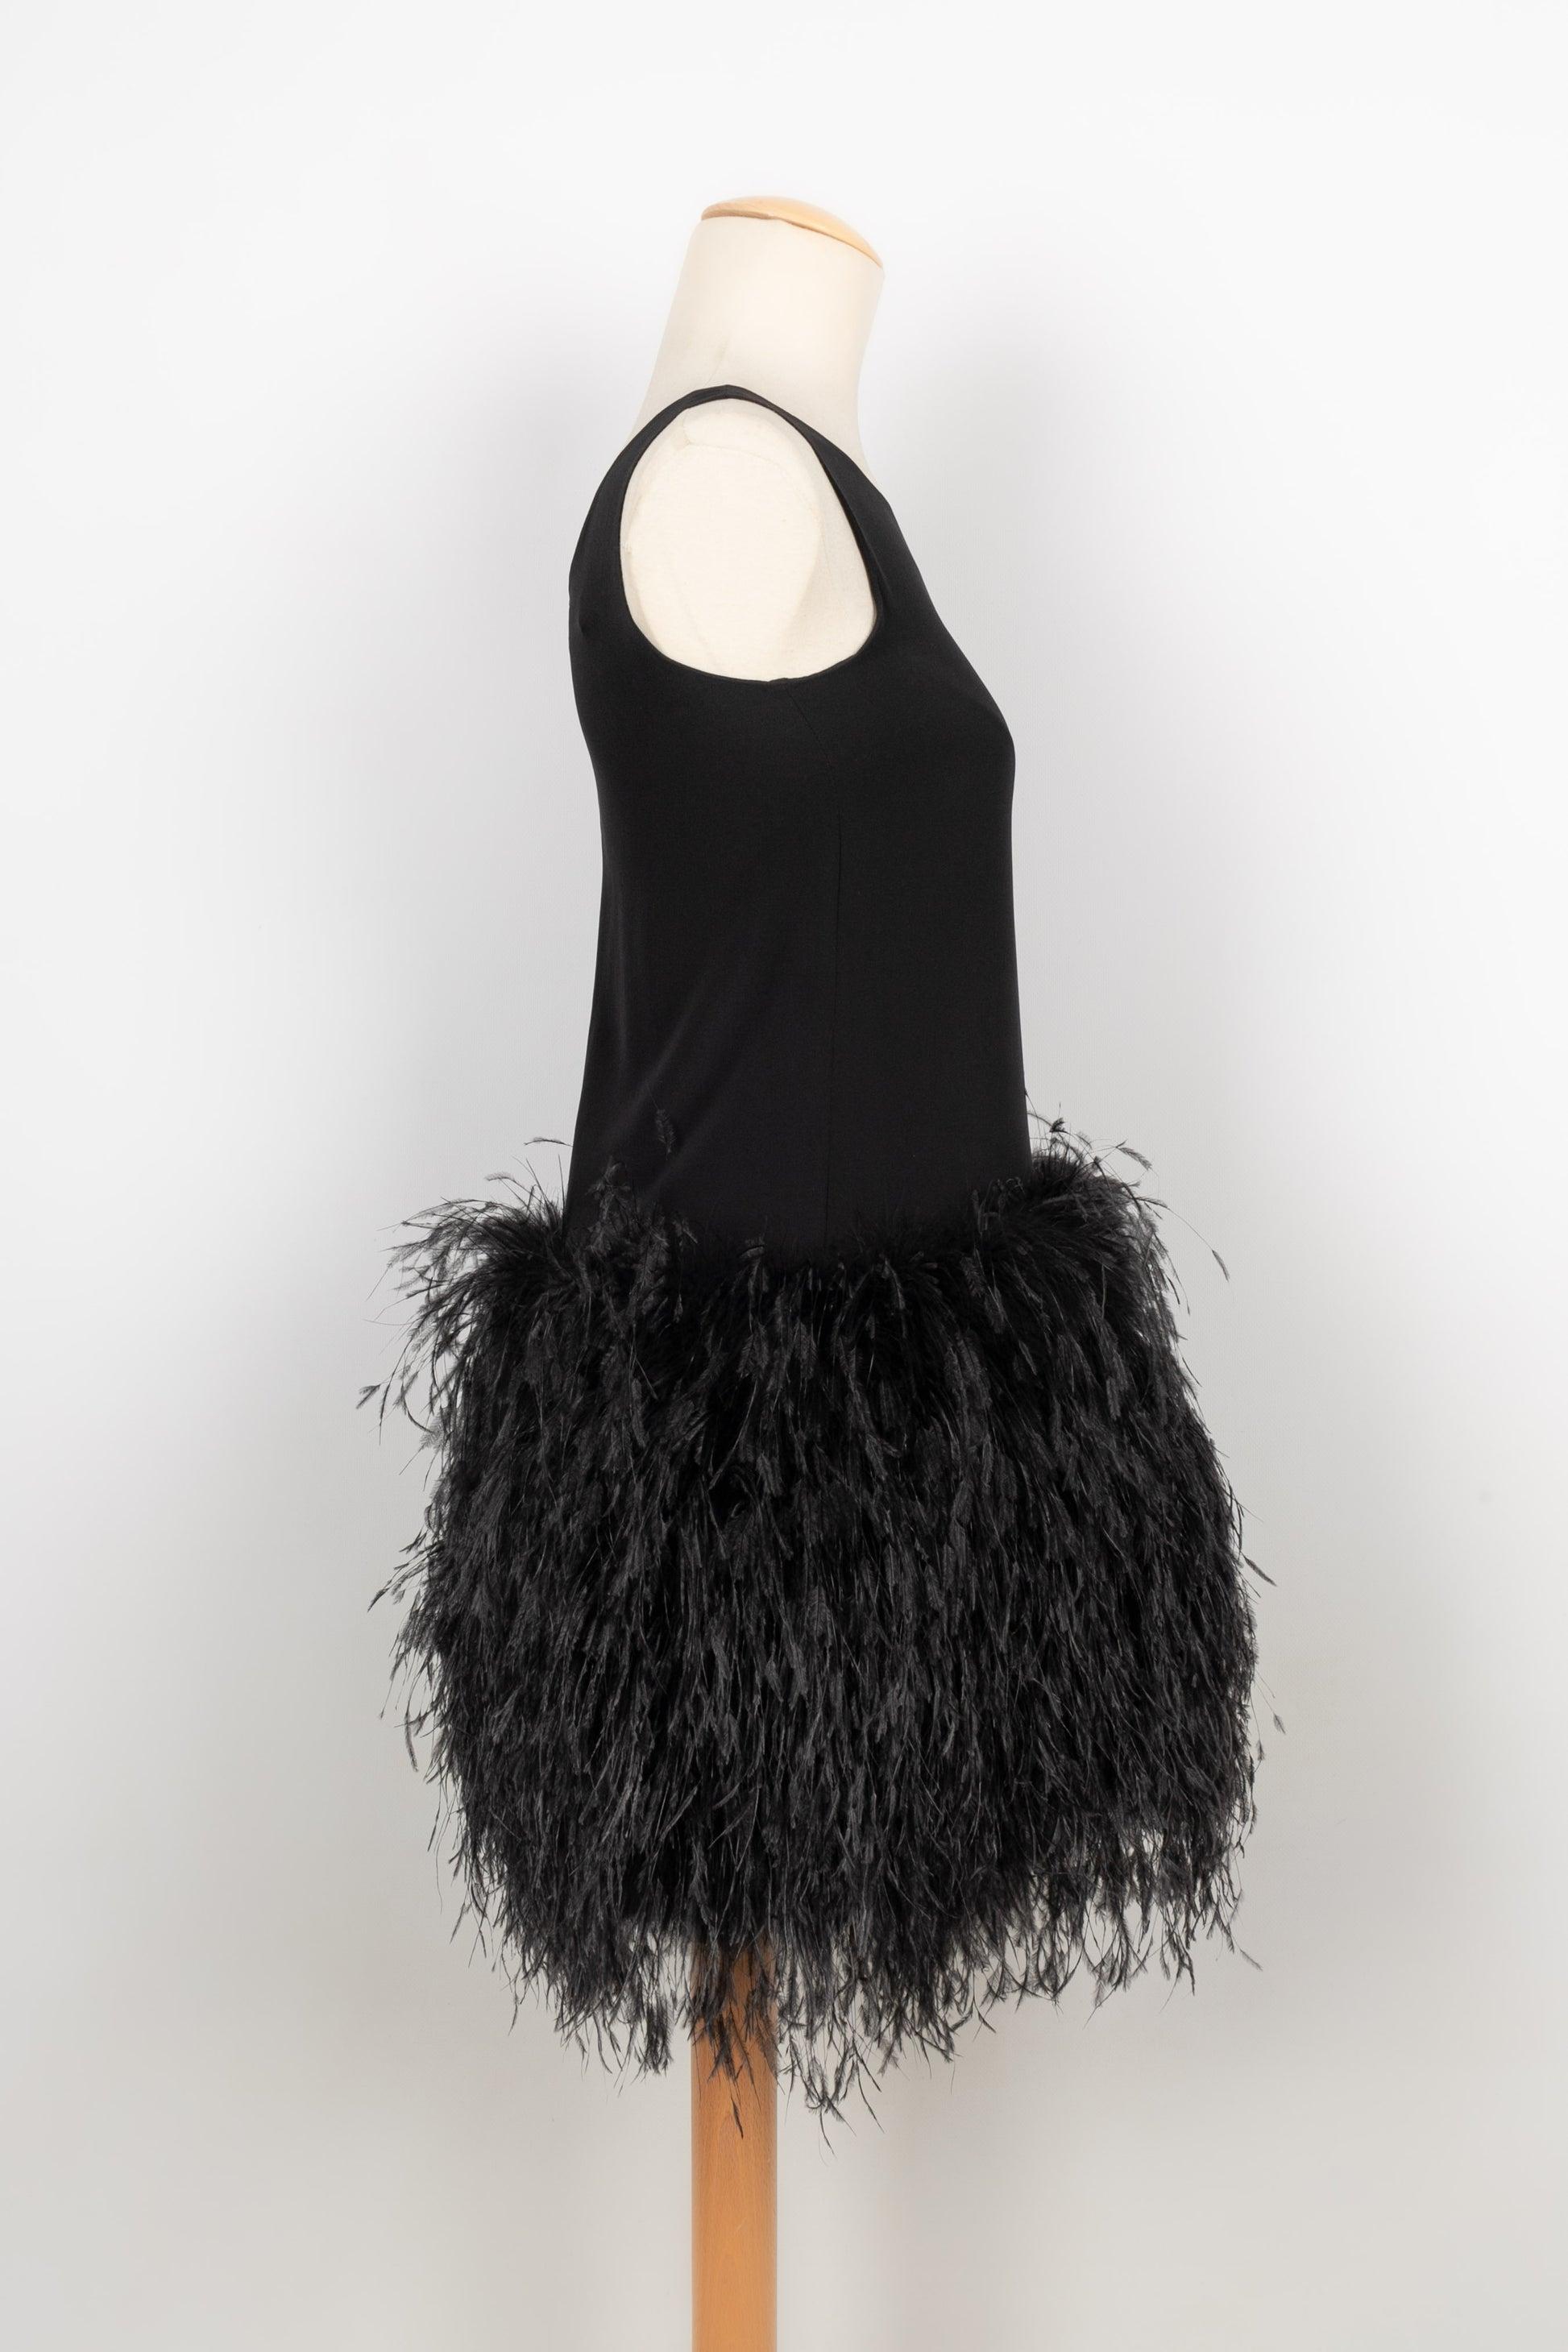 Dior - Short black silk dress with ostrich feathers. No size label, it fits a 36FR. Fall-Winter 2003 Collection.

Additional information:
Condition: Very good condition
Dimensions: Chest: 43 cm - Length: 81 cm
Period: 21st Century

Seller Reference: